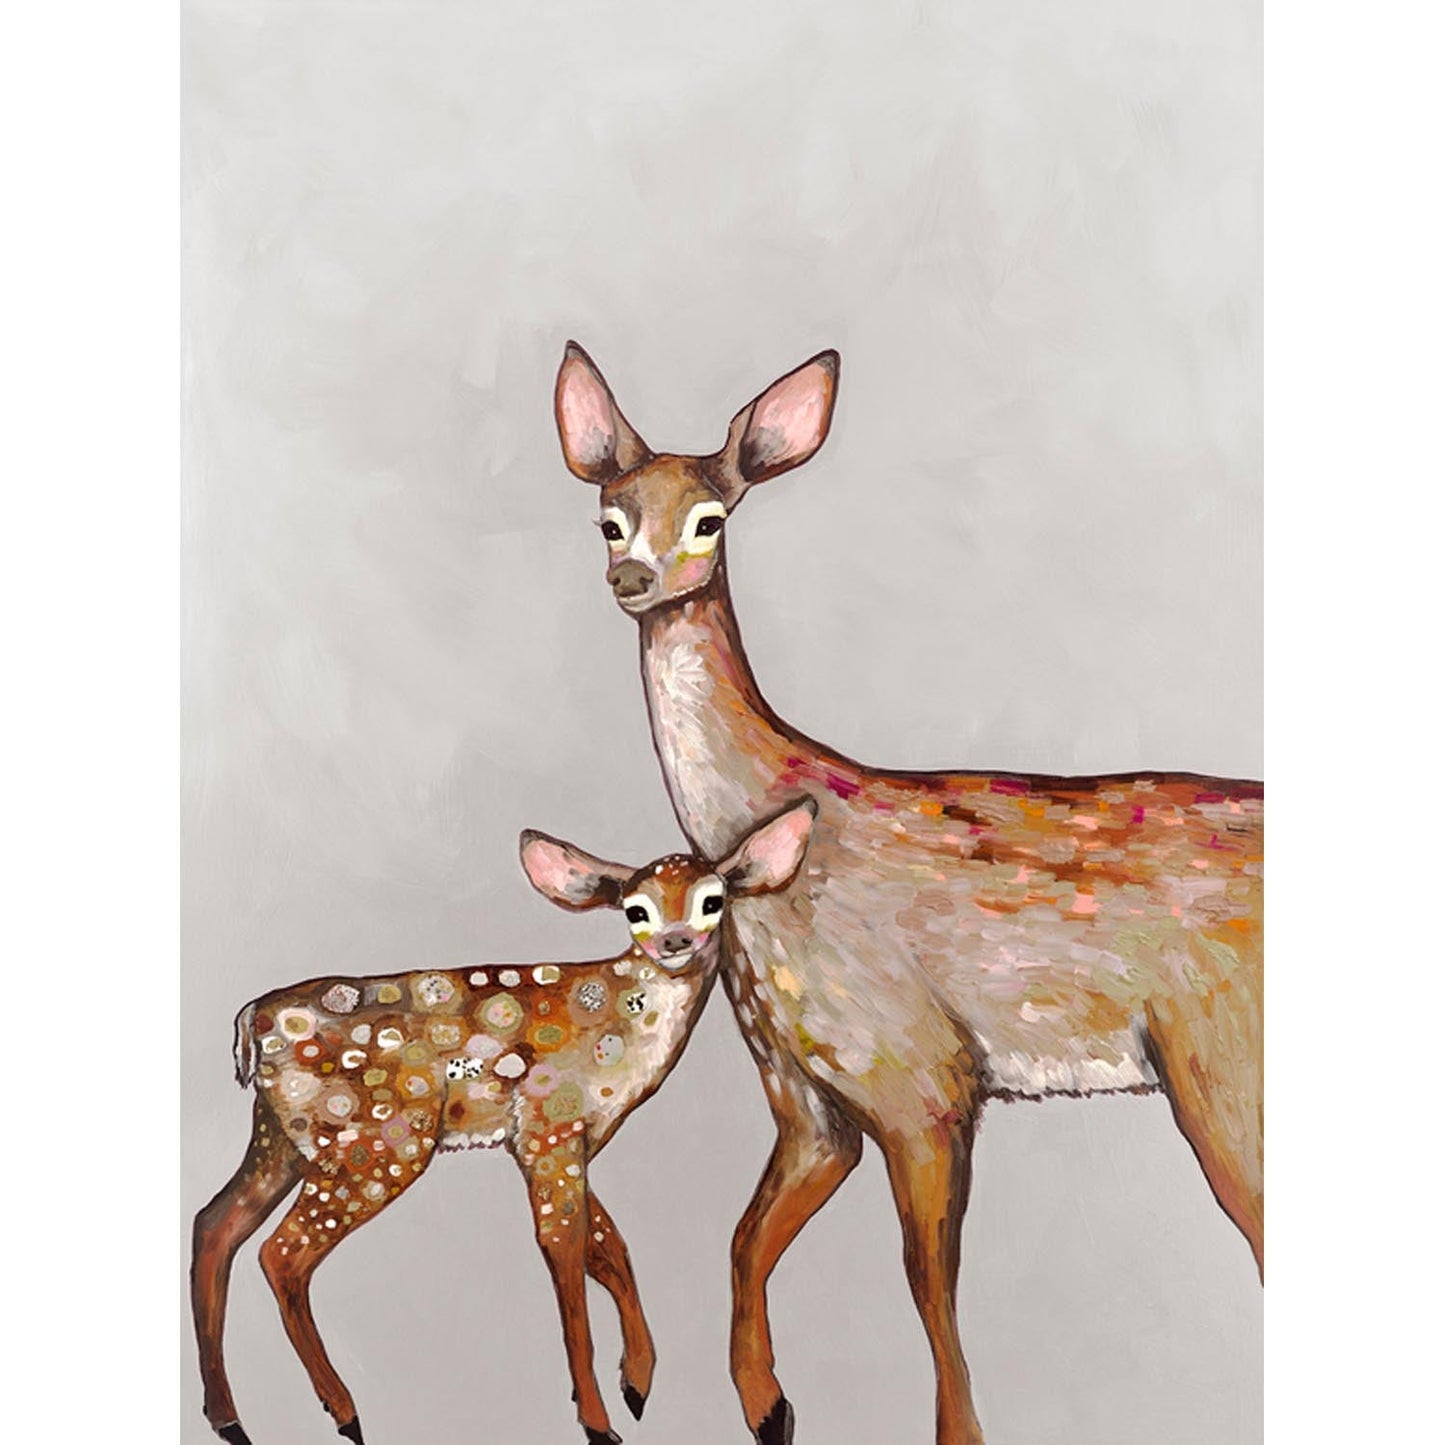 Deer With Fawn - Soft Pewter Canvas Wall Art